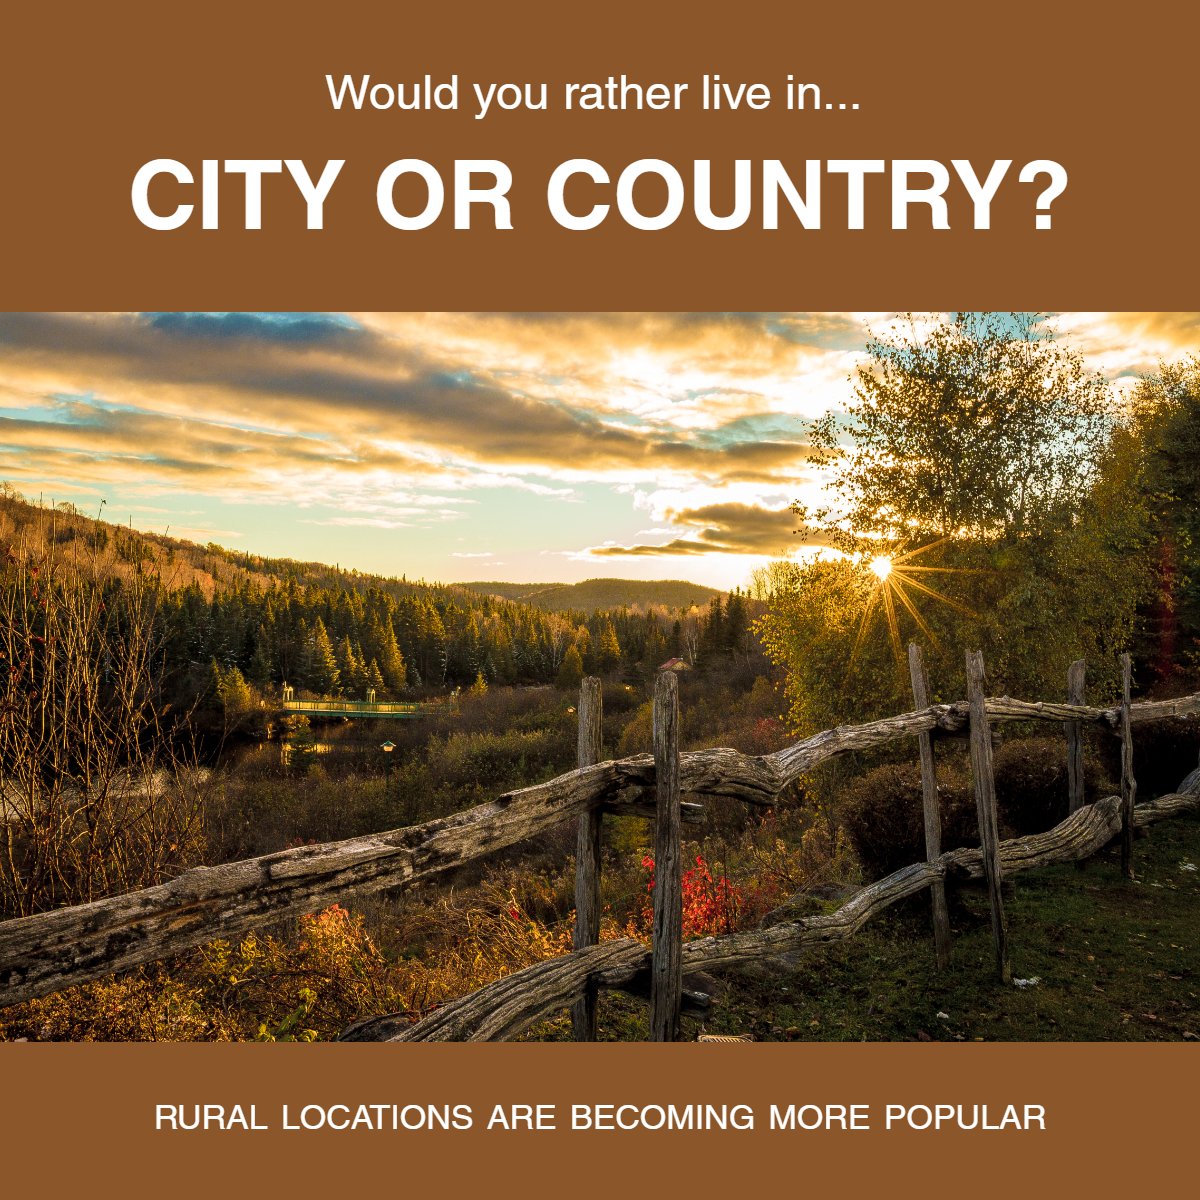 Would you rather live in the city or country? 🏙️🌄

#wouldyourather #cityorcountry #citylights #realestatequestion #realestate